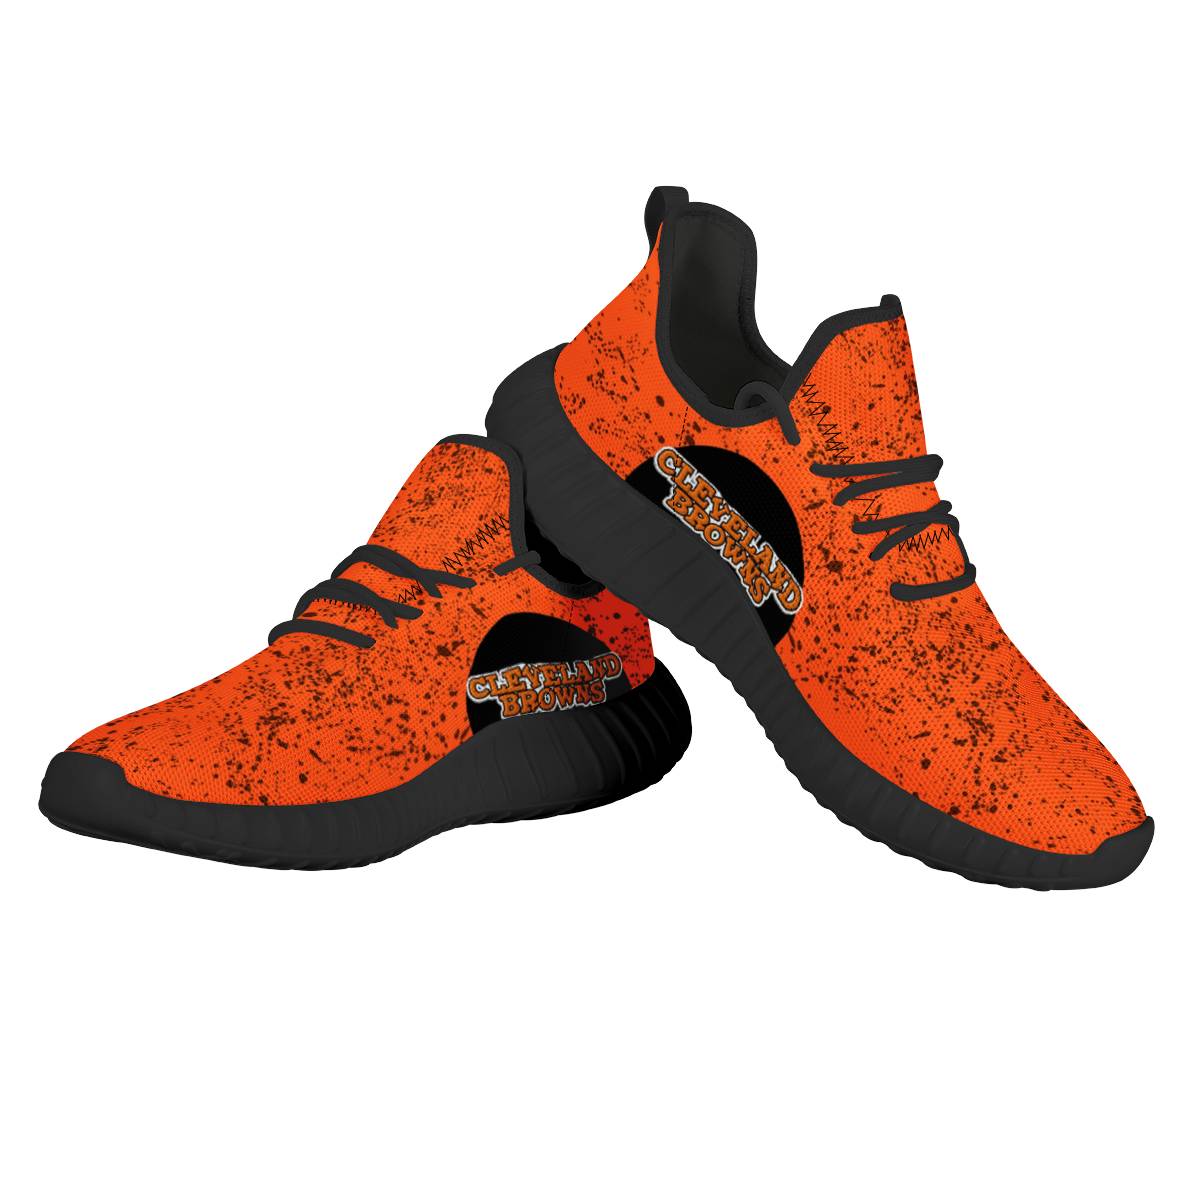 Men's Cleveland Browns Mesh Knit Sneakers/Shoes 009